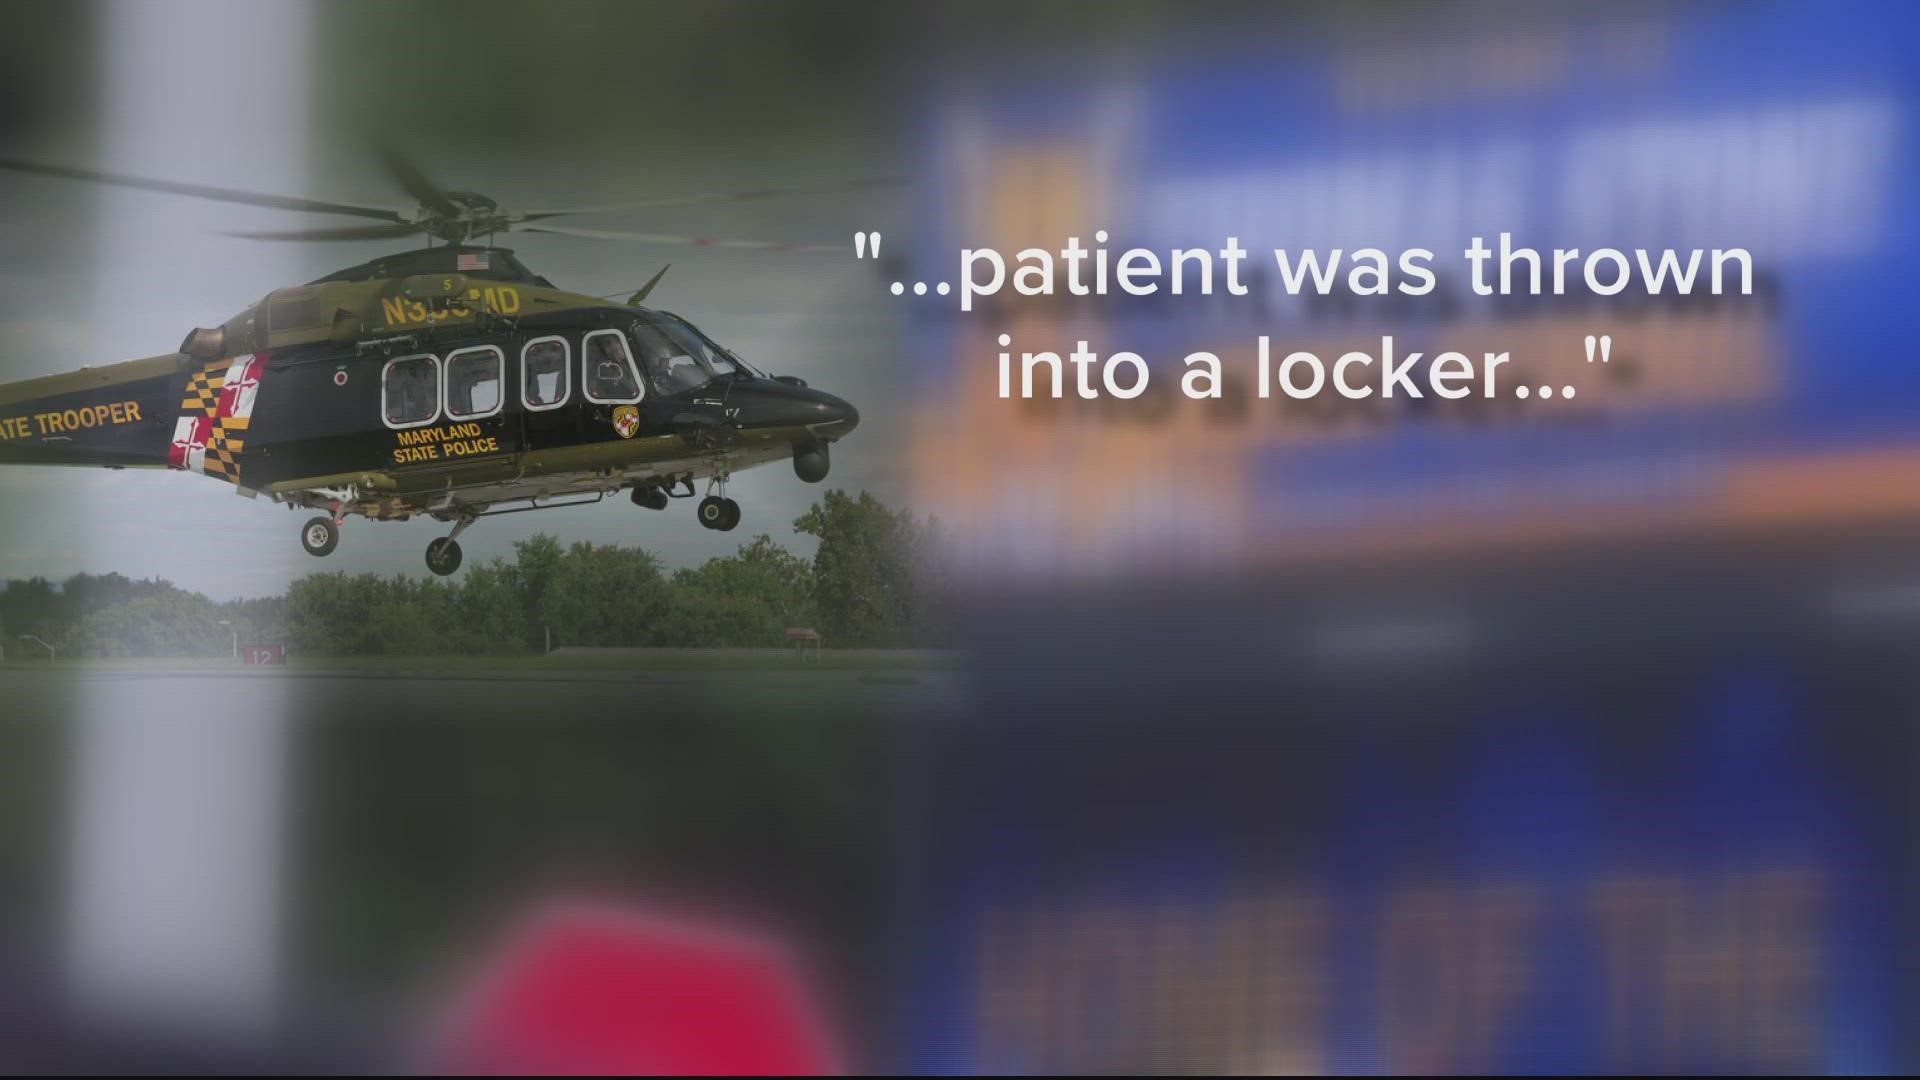 An incident at Thomas Stone High School resulted in a medivac flight for one school staffer, the principal said.